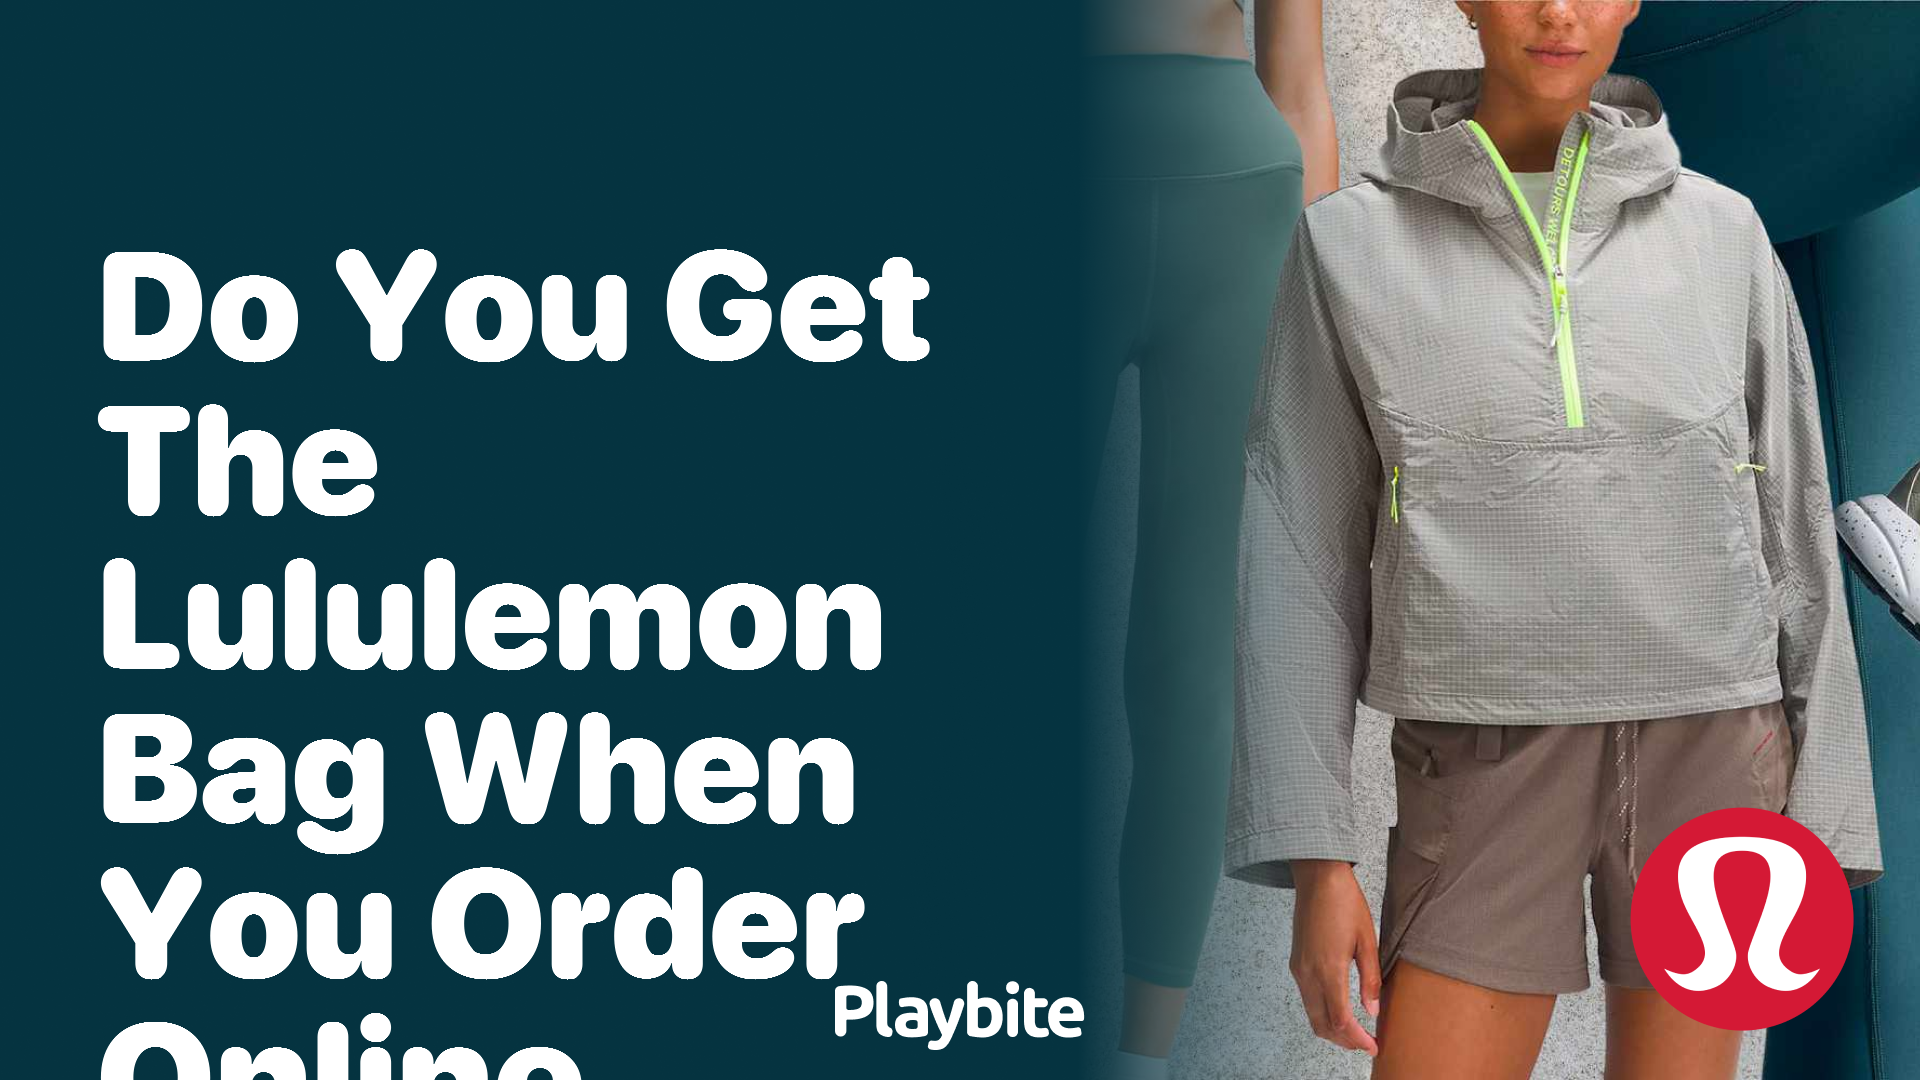 Can You Get a Lululemon Bag for Free? - Playbite